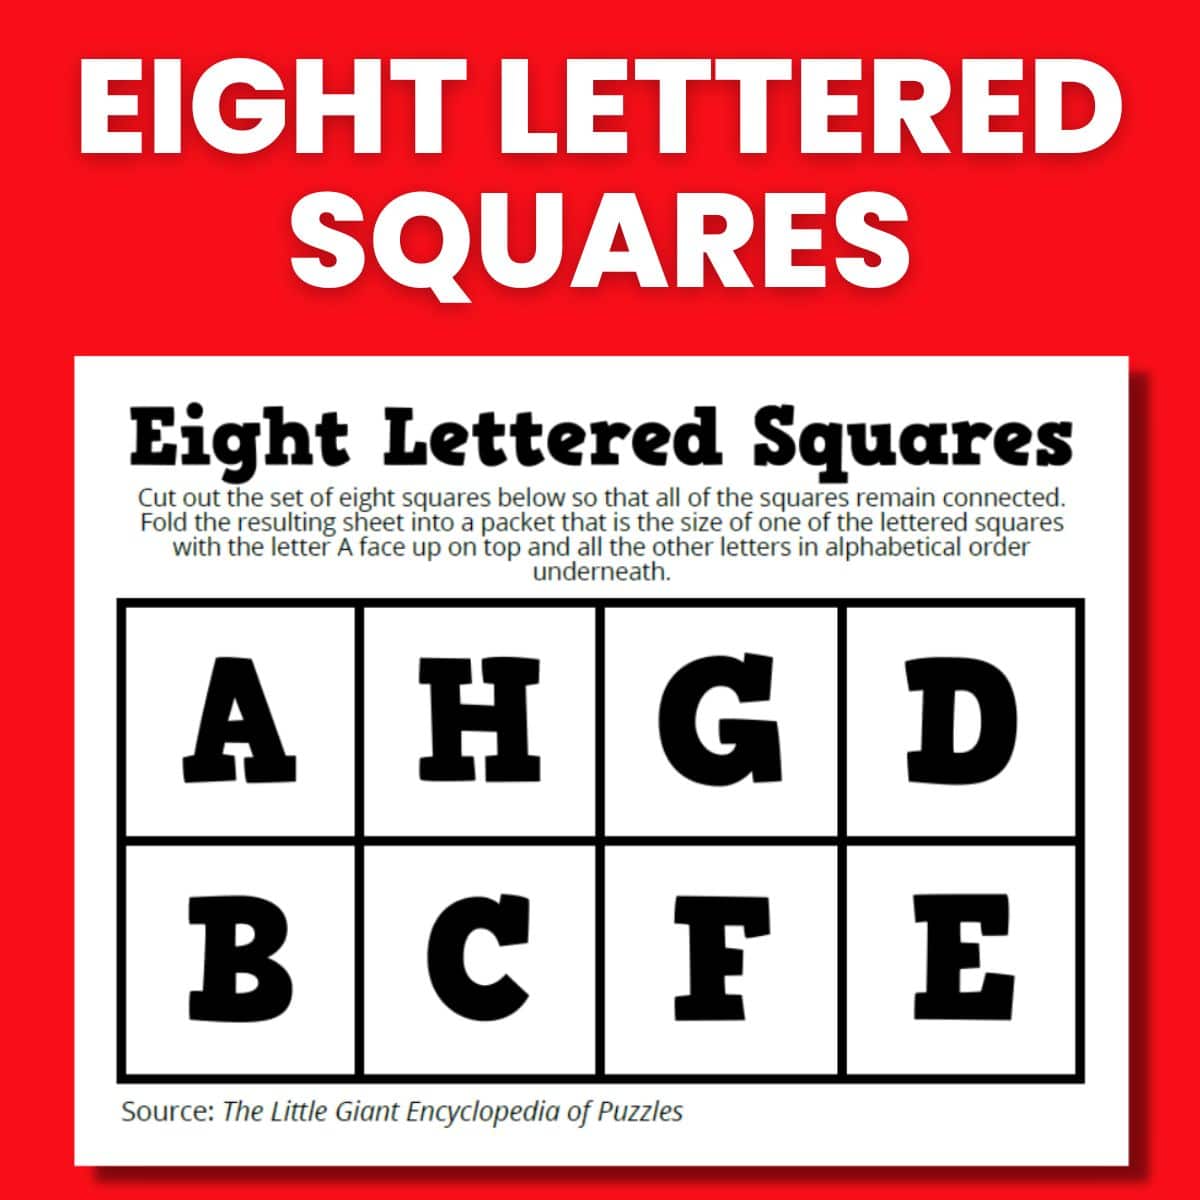 eight lettered squares puzzle screenshot with text "eight lettered squares" 